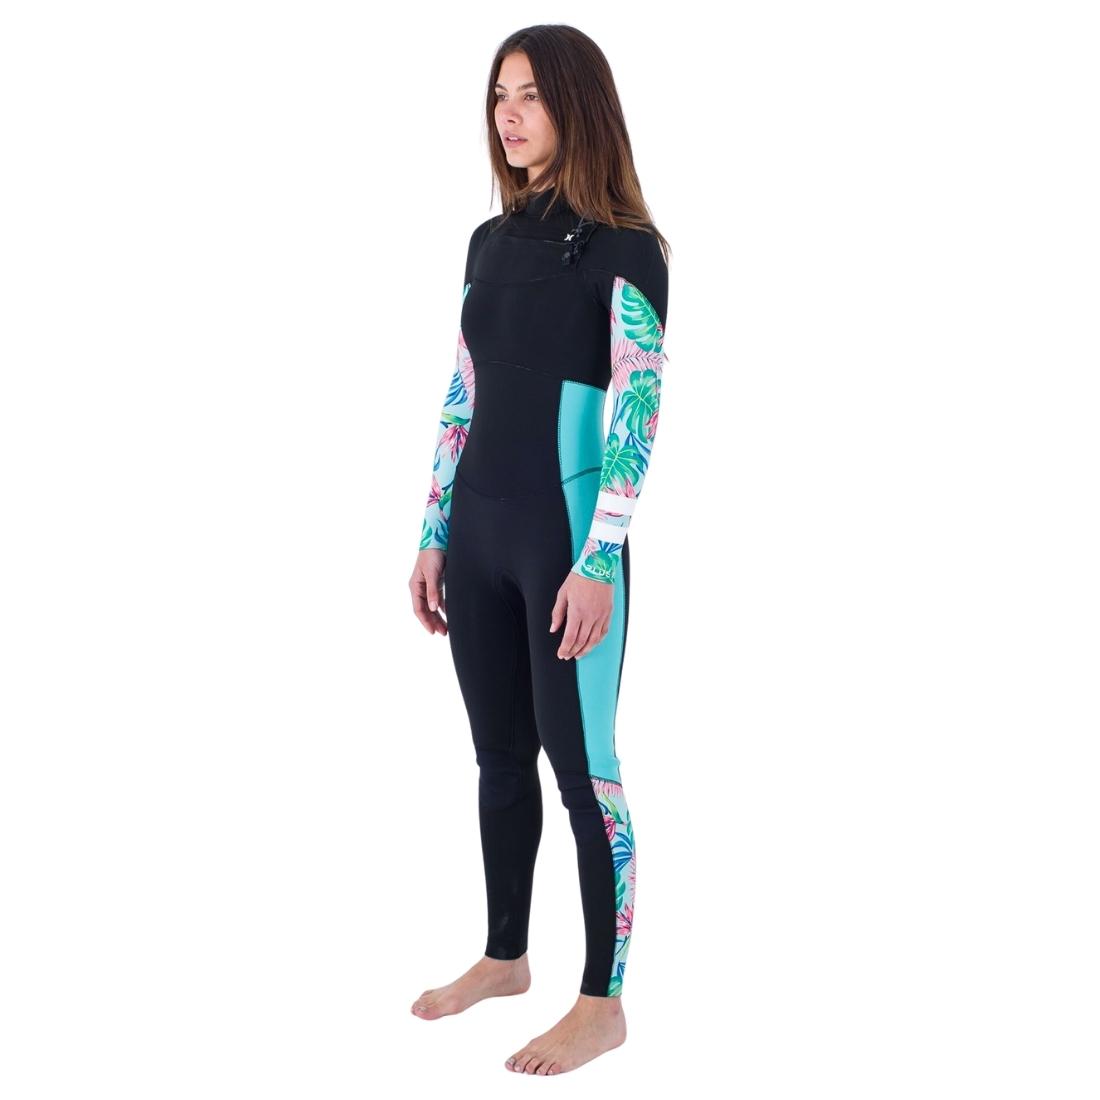 Hurley Womens Plus Printed 3/2mm Chest Zip Full Wetsuit - Java Tropical - Womens Full Length Wetsuit by Hurley